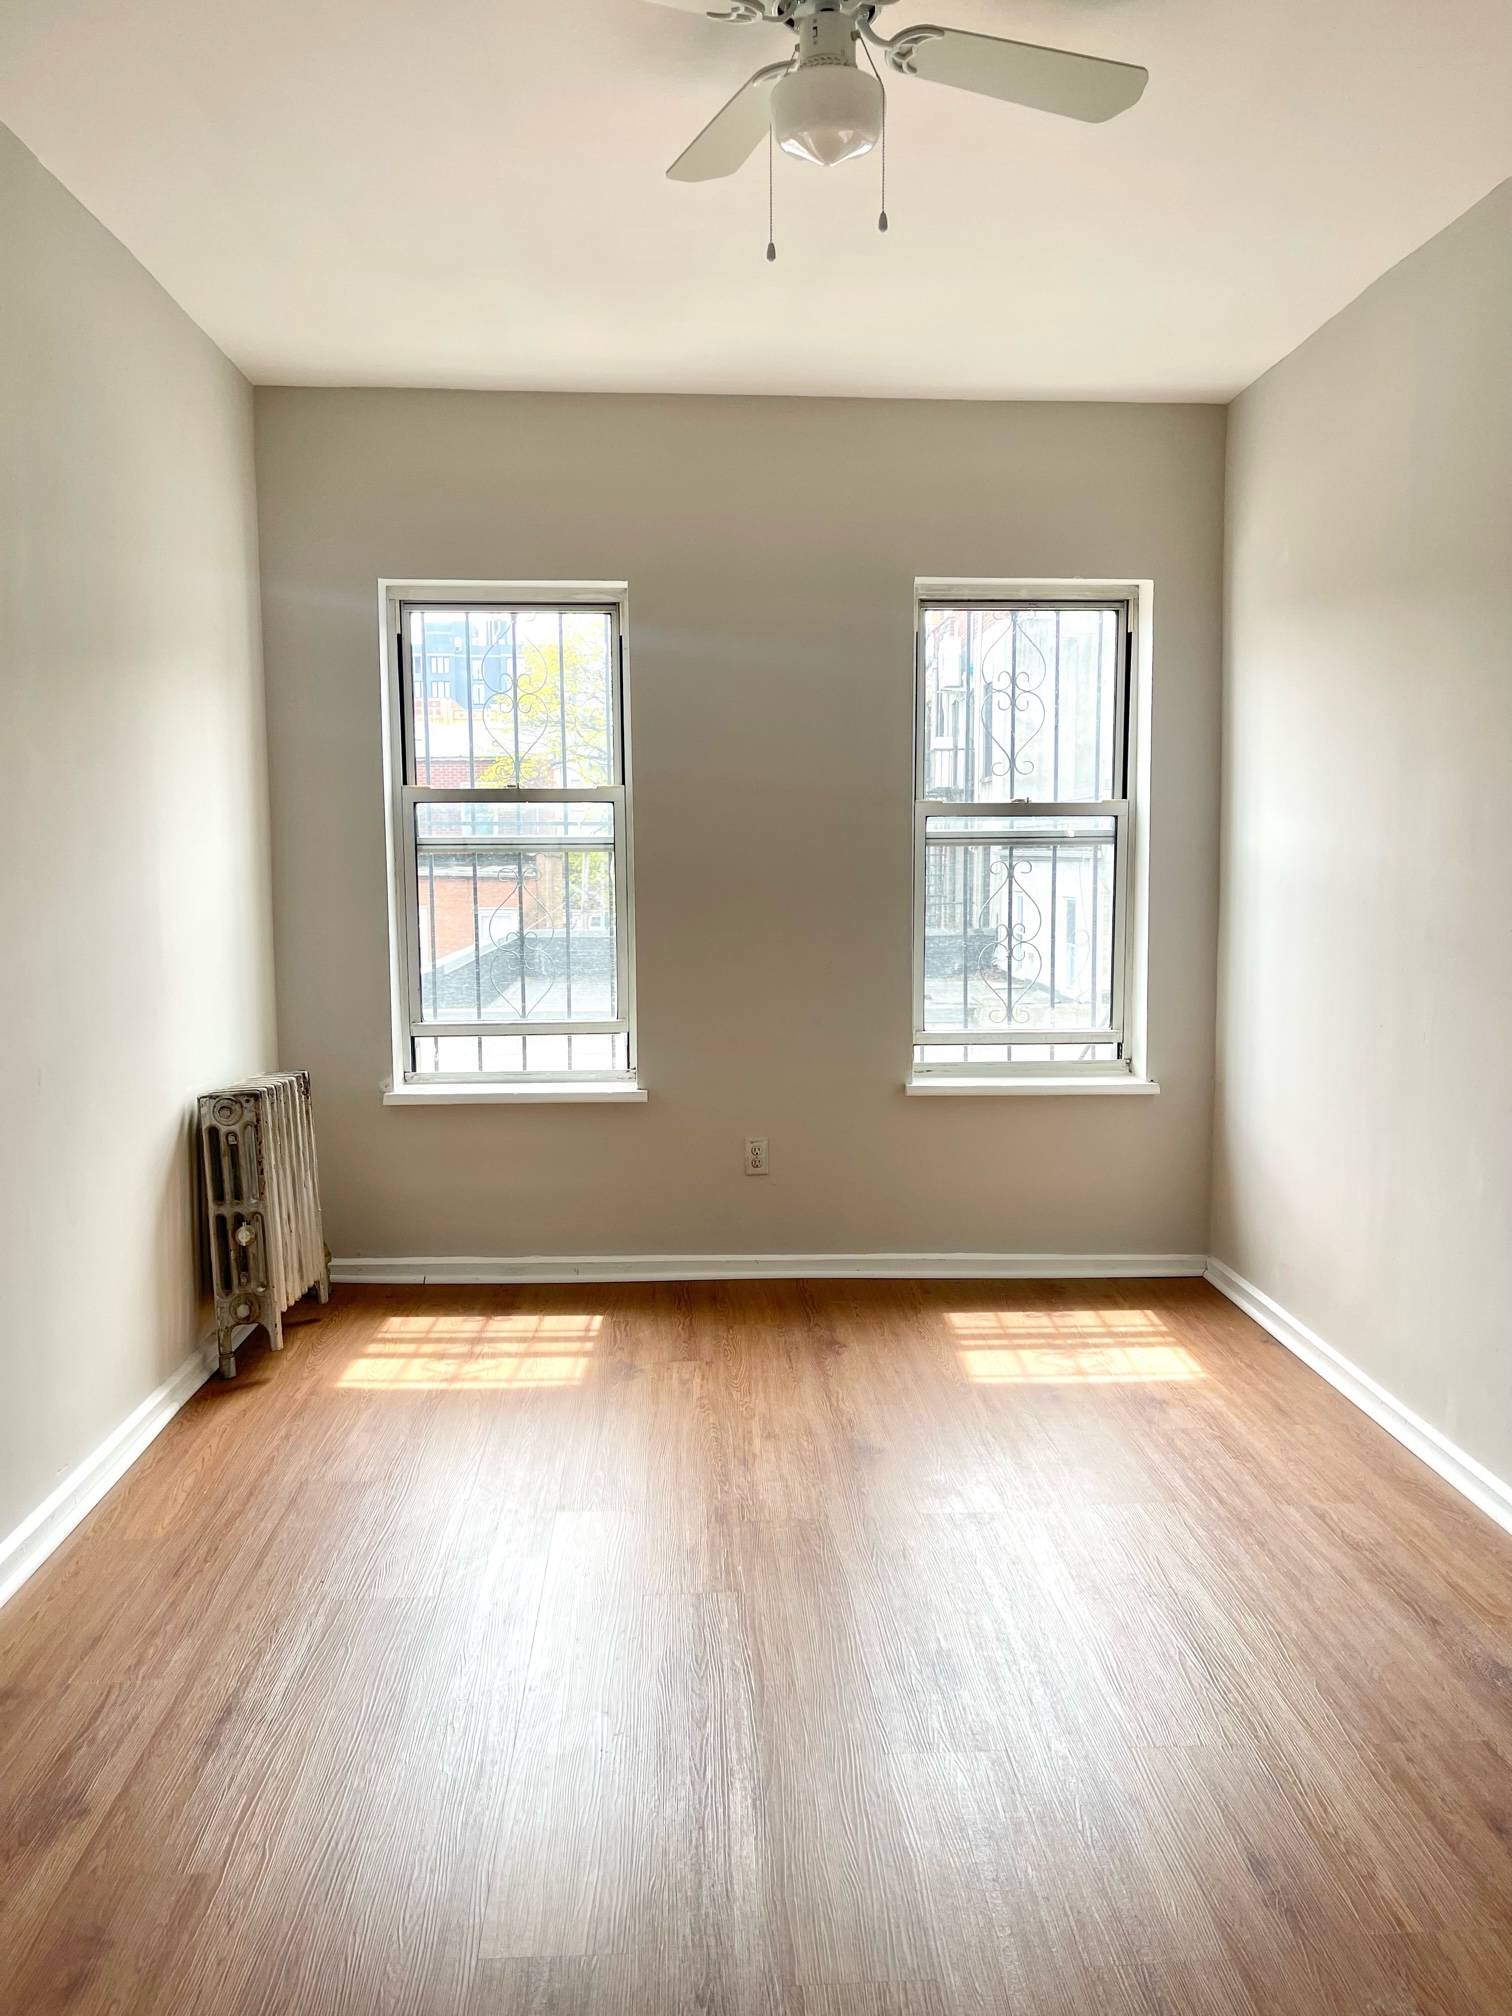 Renovated 3 bed/1 bath apartment in the Heart of Ocean Hill!